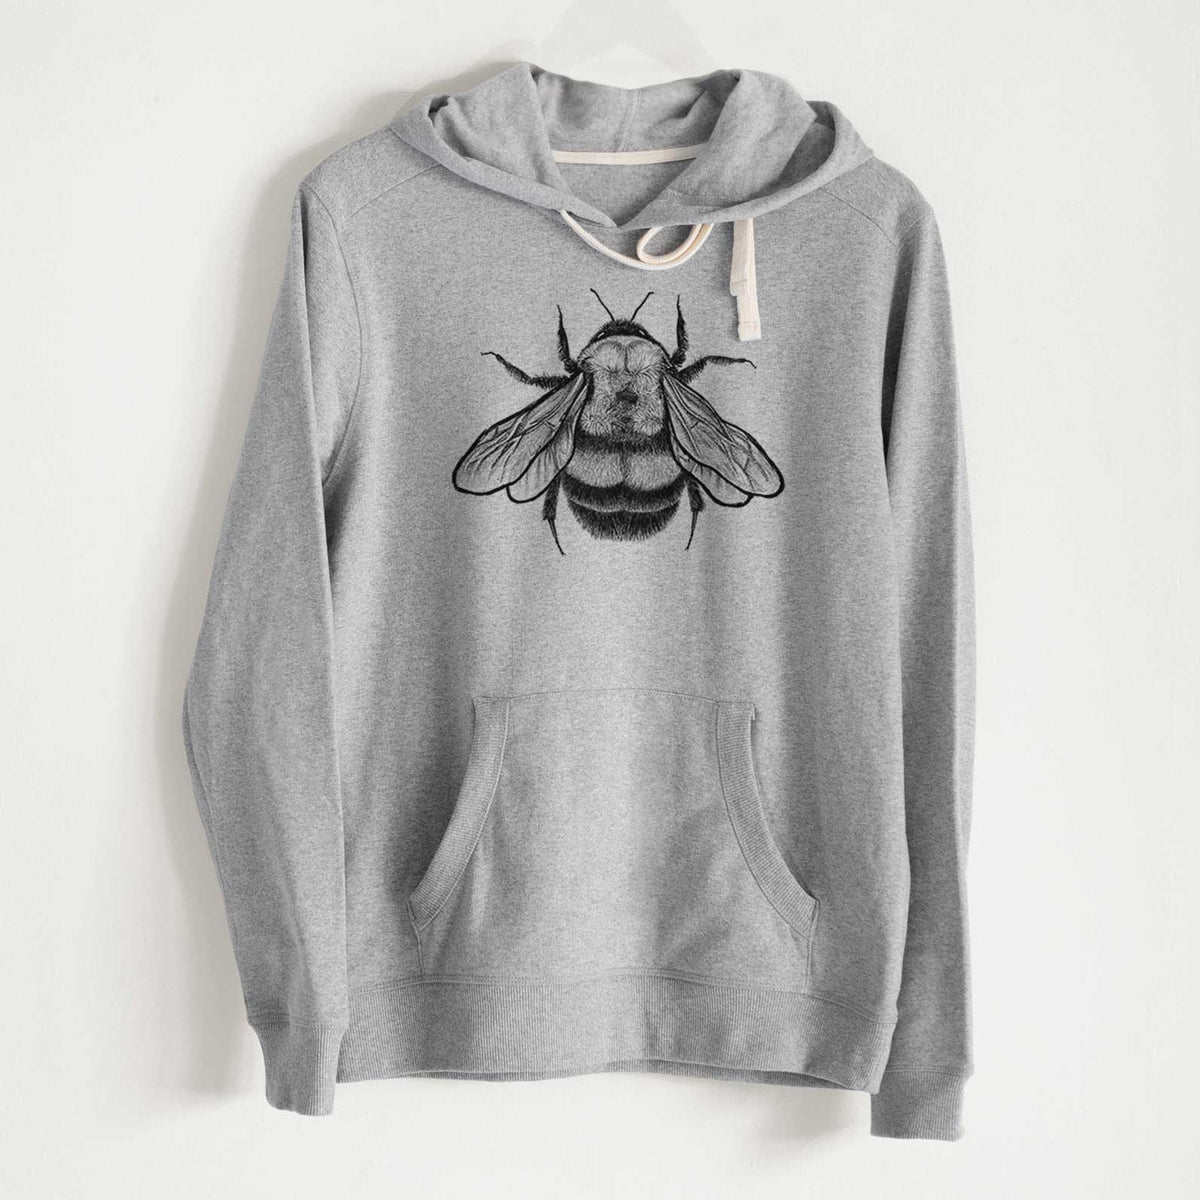 Bombus Affinis - Rusty-Patched Bumble Bee - Unisex Recycled Hoodie - CLOSEOUT - FINAL SALE